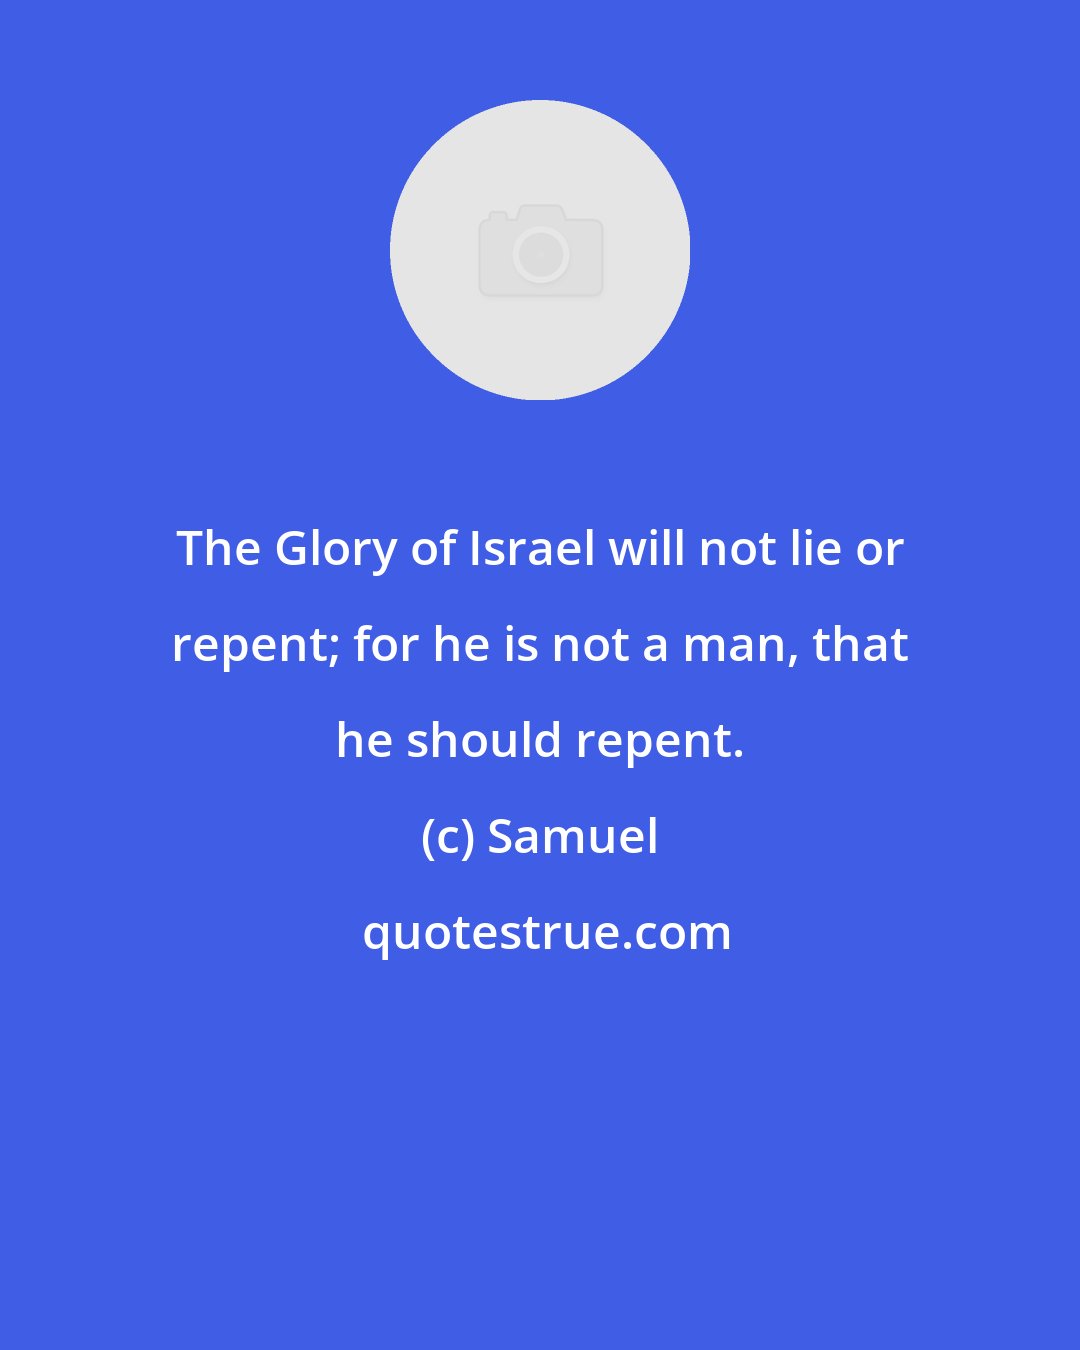 Samuel: The Glory of Israel will not lie or repent; for he is not a man, that he should repent.